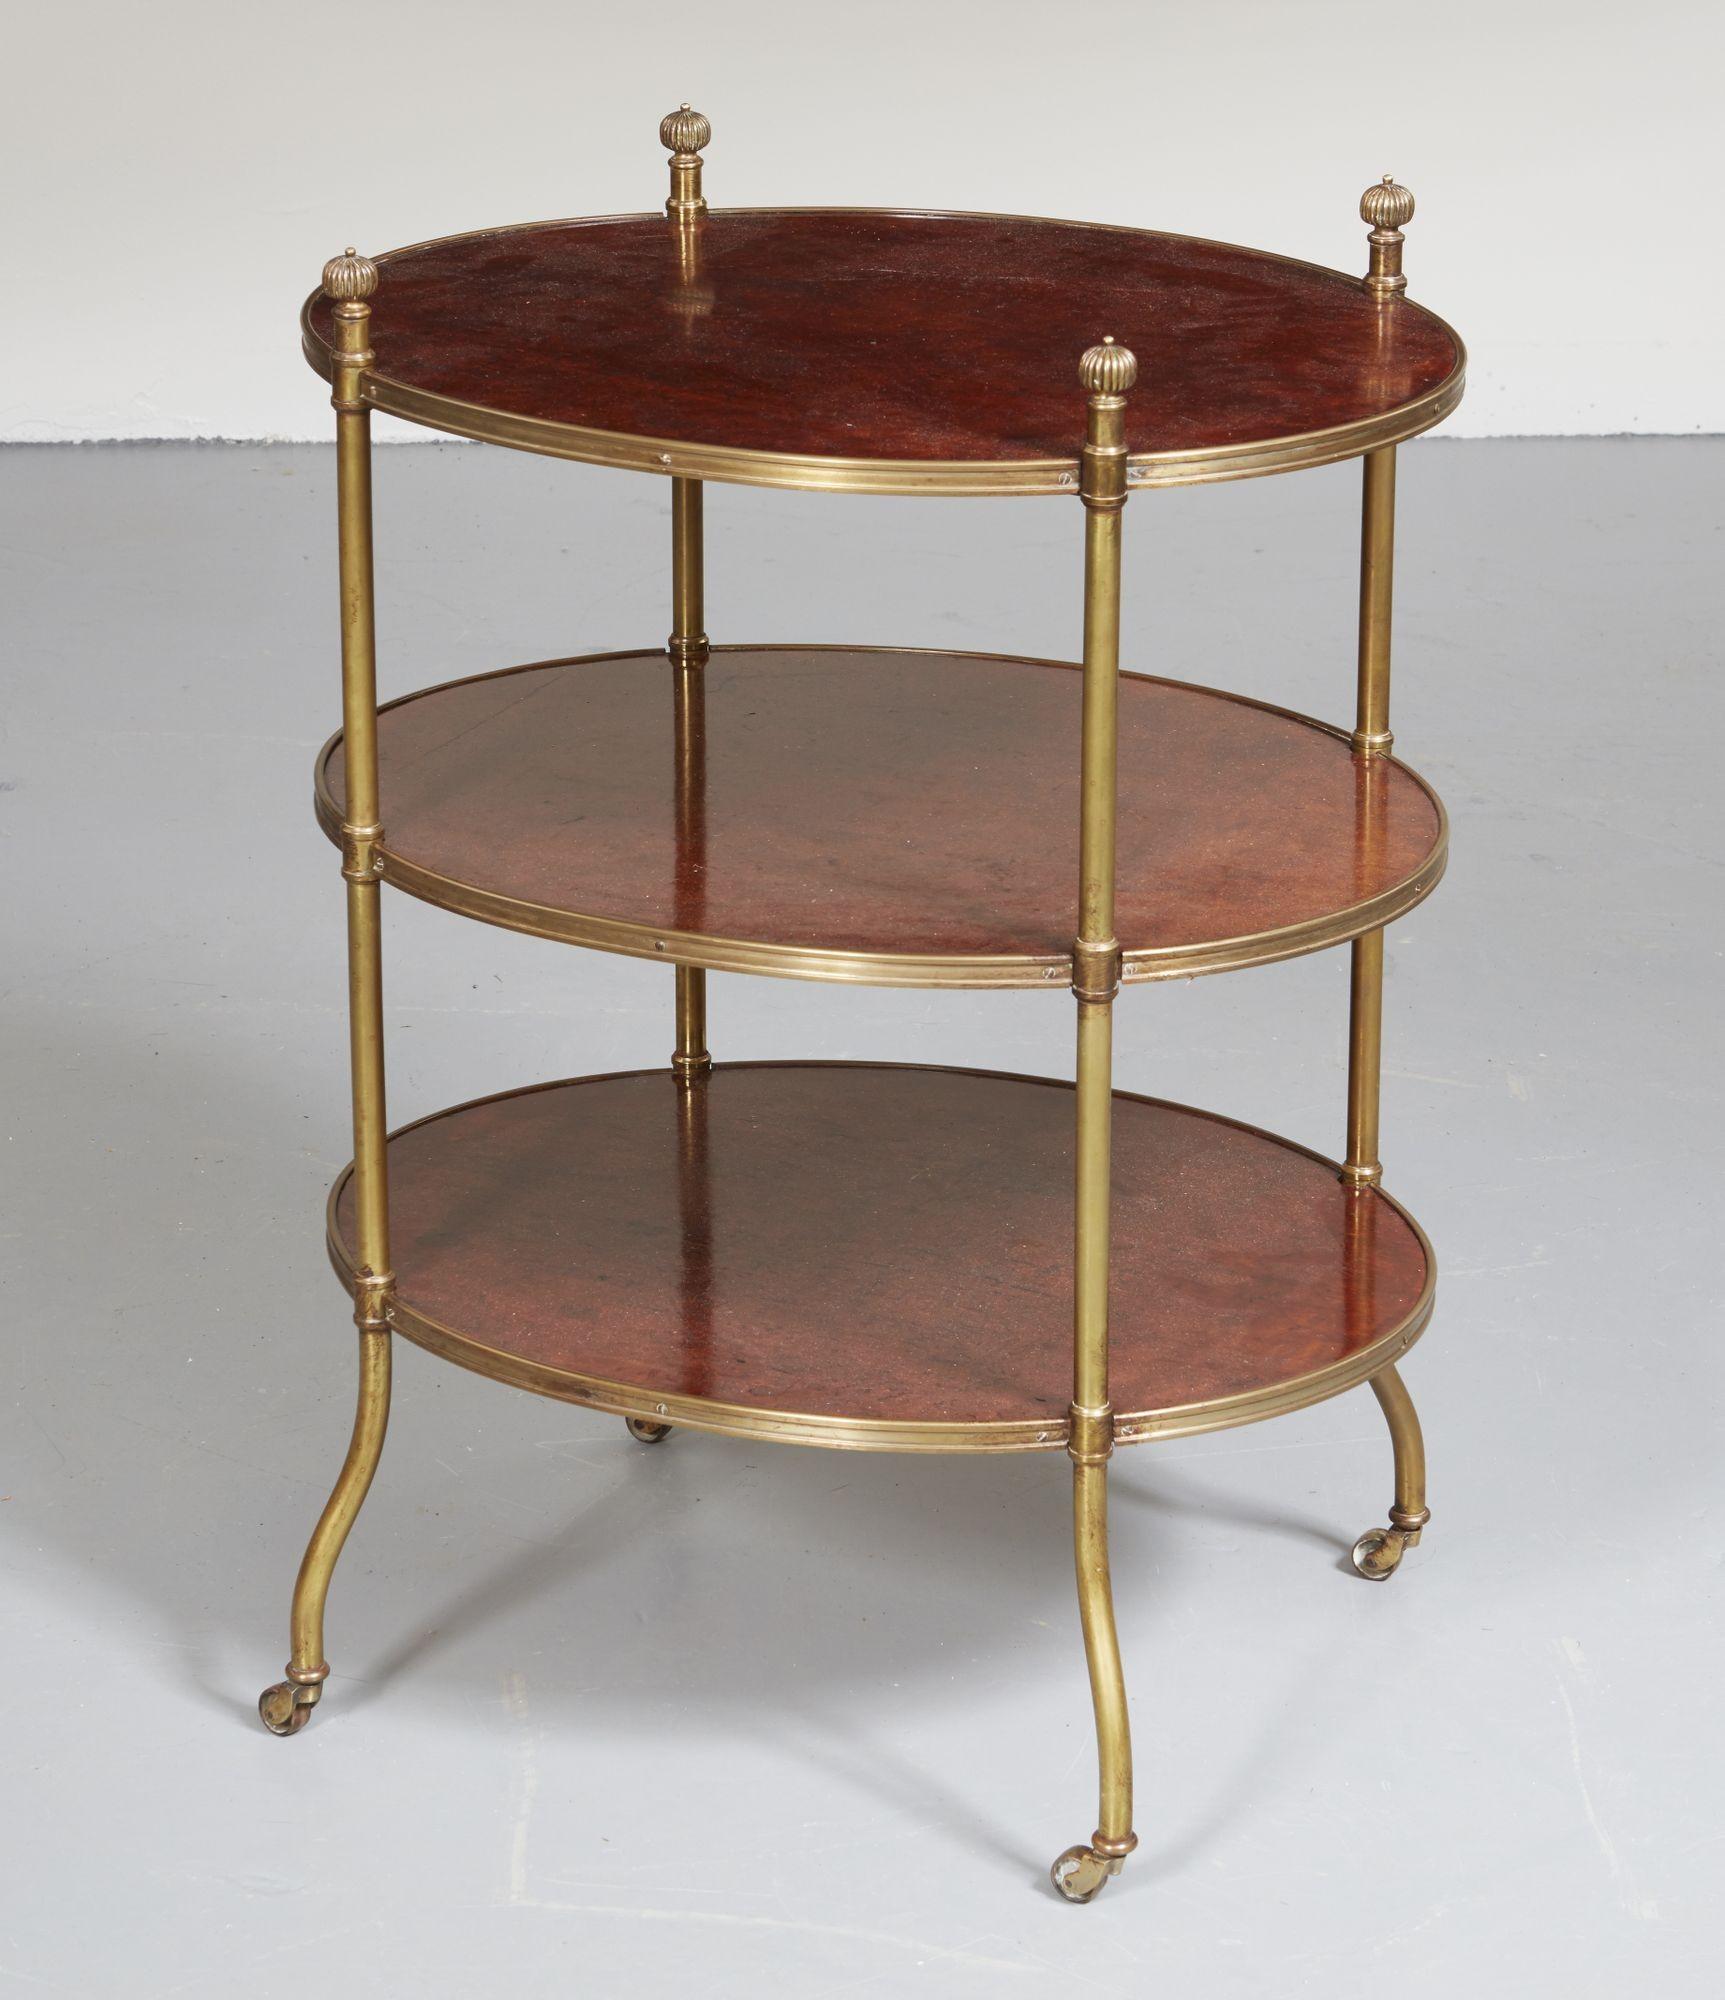 An early 19th century campaign table of oval shape with three tiers of beautiful plum pudding timber, each banded with reeded brass and connected together on four brass legs with decorative finials to the top and outturned bases ending in find brass